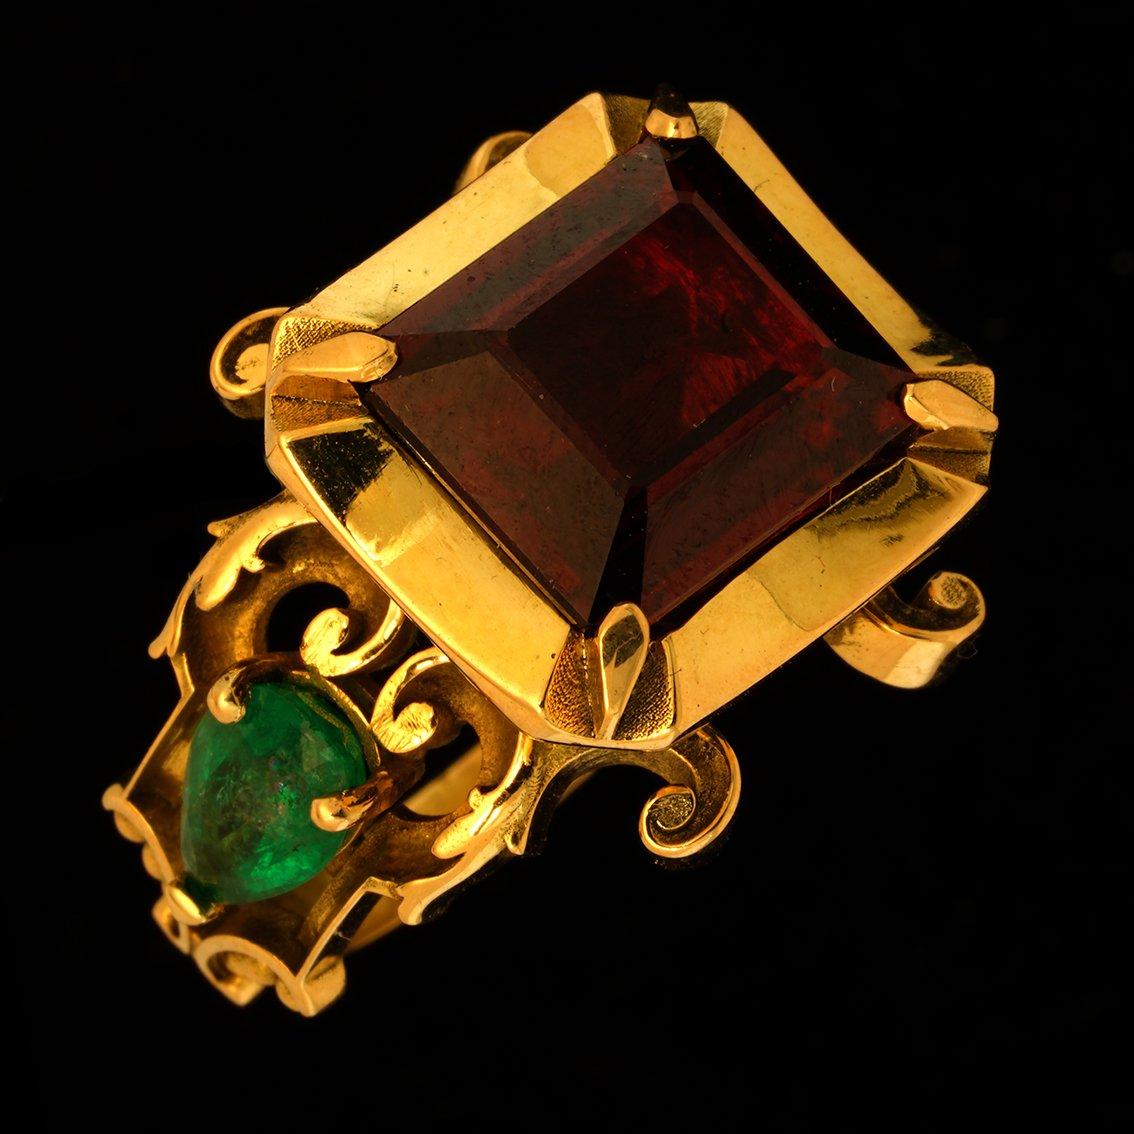 Conjuring the colors and fine embroidery work of robes worn by medieval kings and queens, this stately ring is exquisitely handcrafted in 18kt yellow gold and features a rich 4 claw set 11mm x 13mm 7.9ct garnet, it’s color offset beautifully against